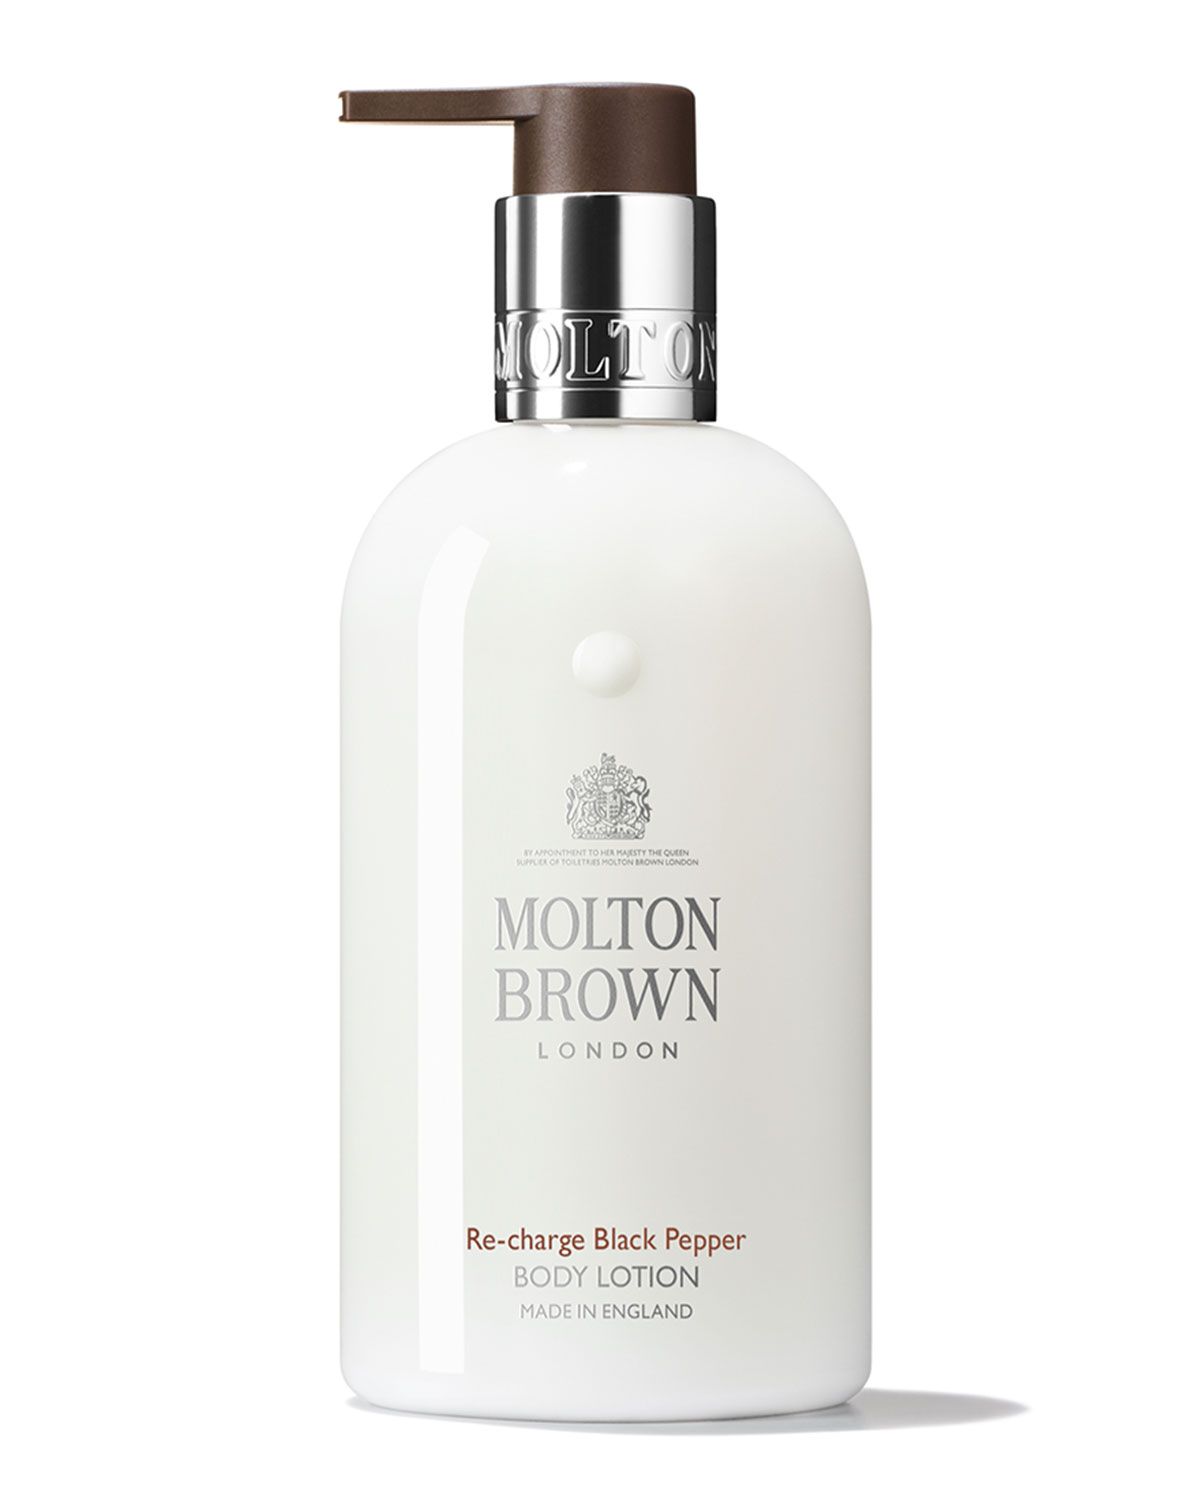 10 oz. Re-Charge Black Peppercorn Body Lotion | Neiman Marcus